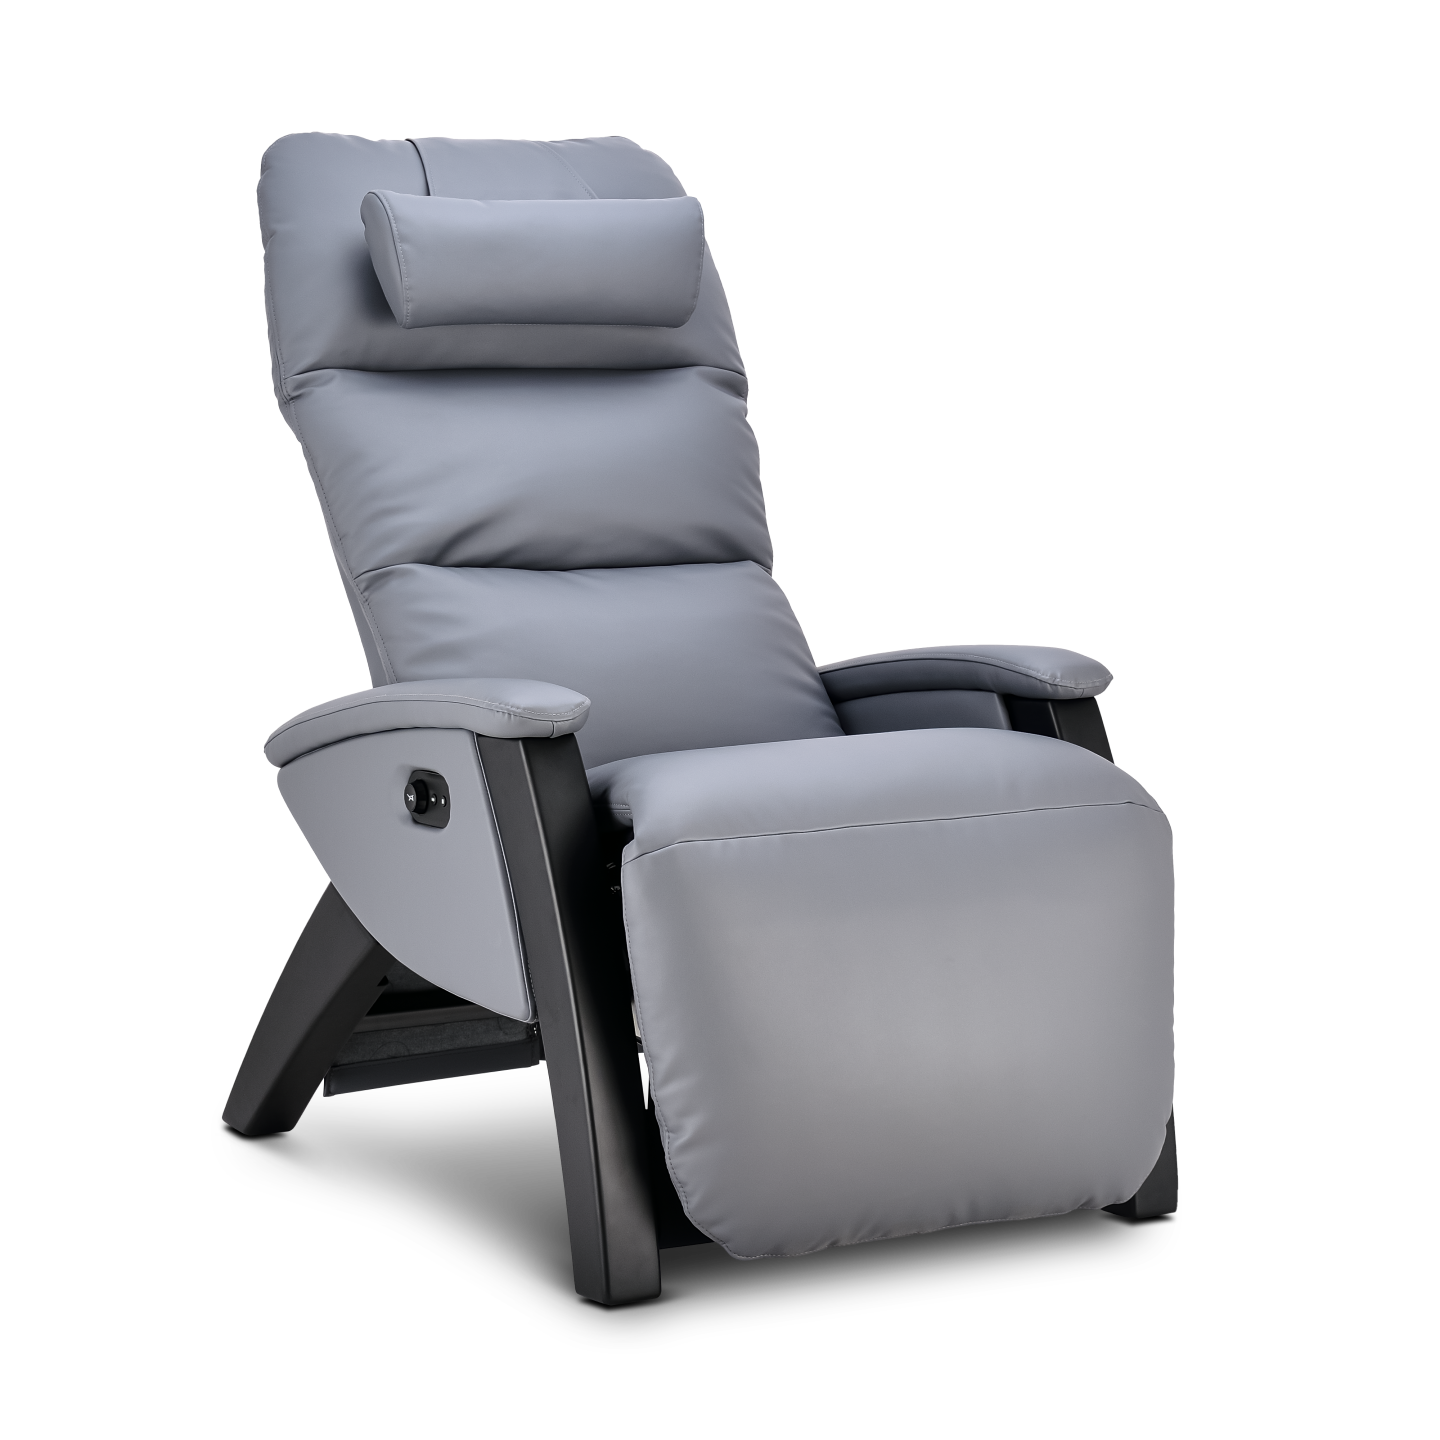 Benefits of Vibration Massage Feature in Zero Gravity Chairs